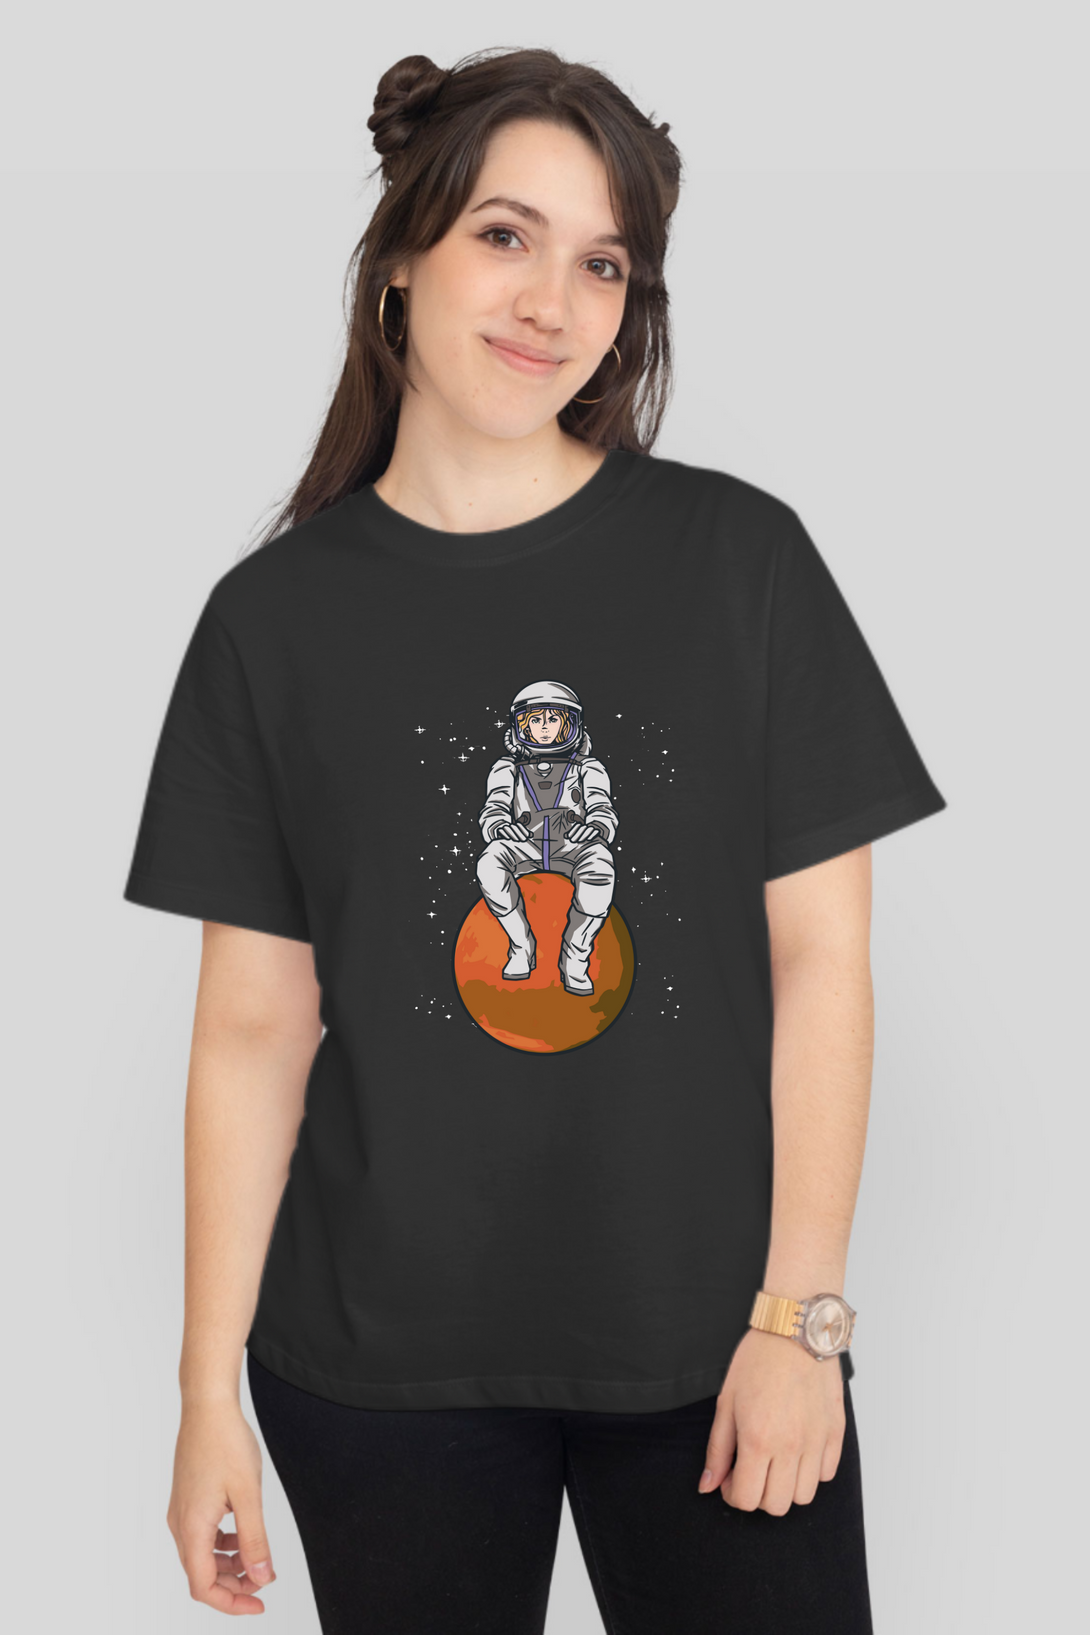 Space Explorer Printed T-Shirt For Women - WowWaves - 8